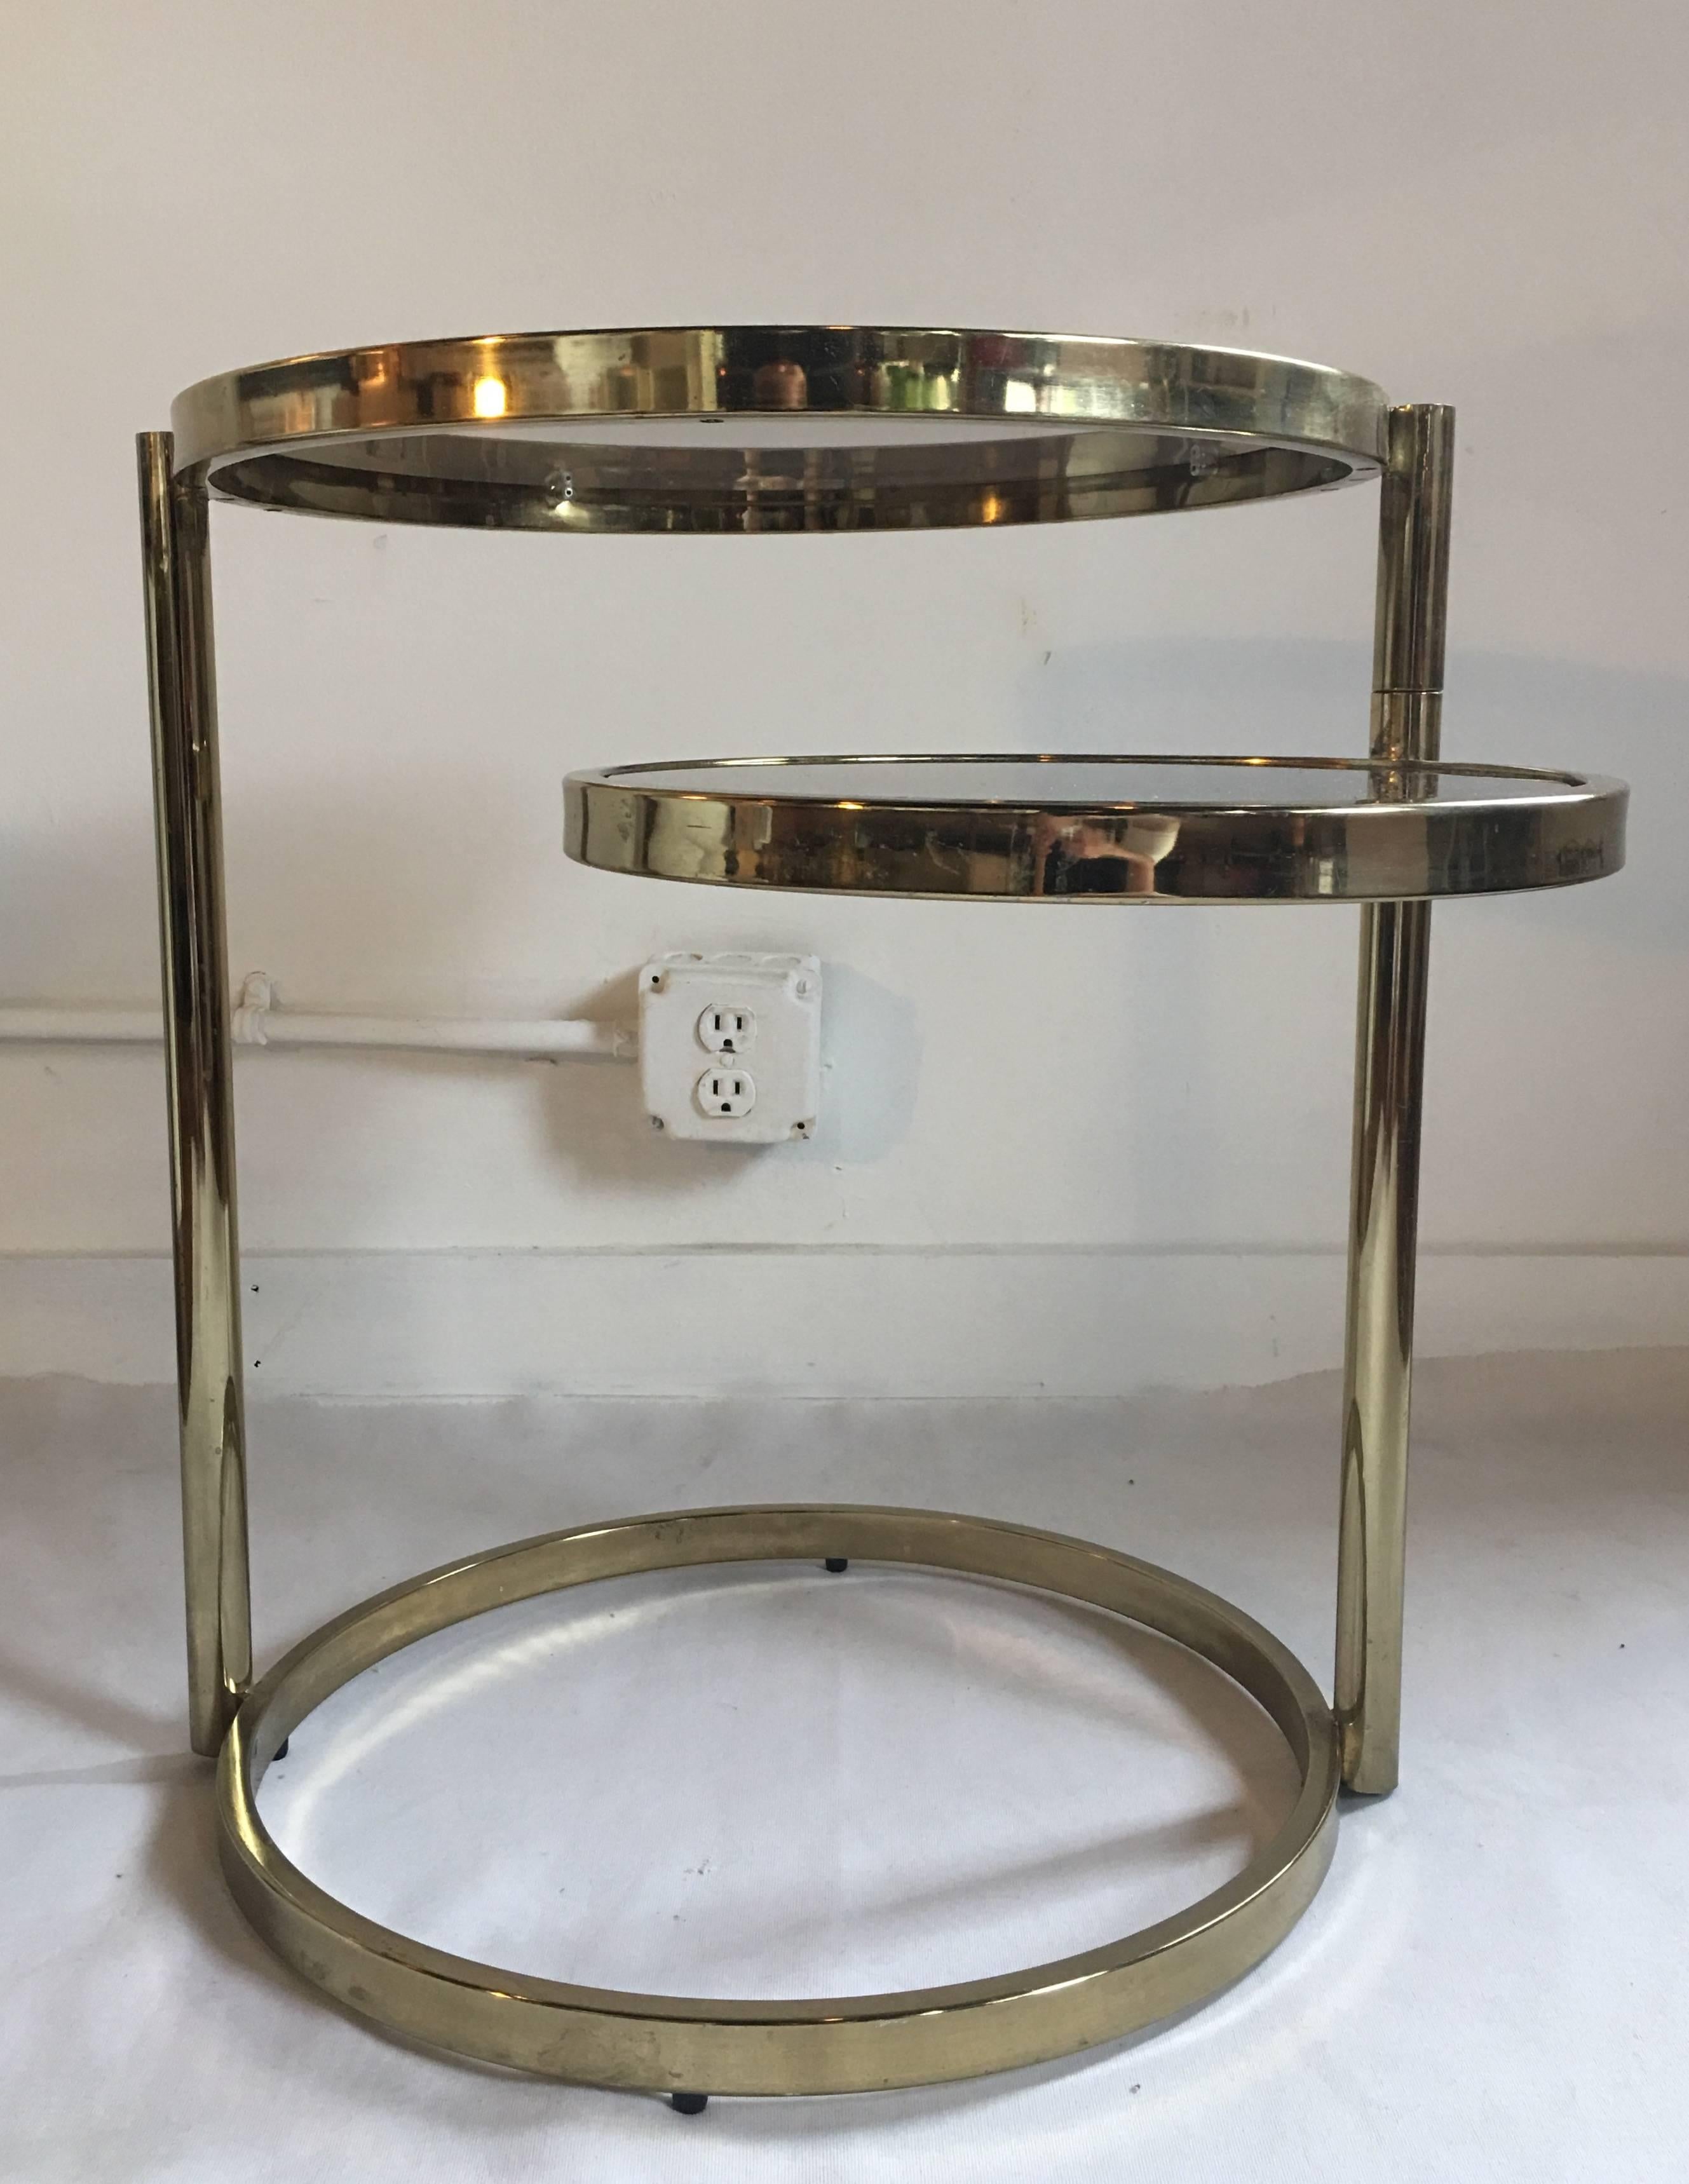 1970s Milo Baughman style Mid-Century Modern two-tier articulating swivel brass accent or side table. Tubular brass plated frame features two removable round smoked grey glass inserts. Top tier is stationary while the bottom tier can swivel to